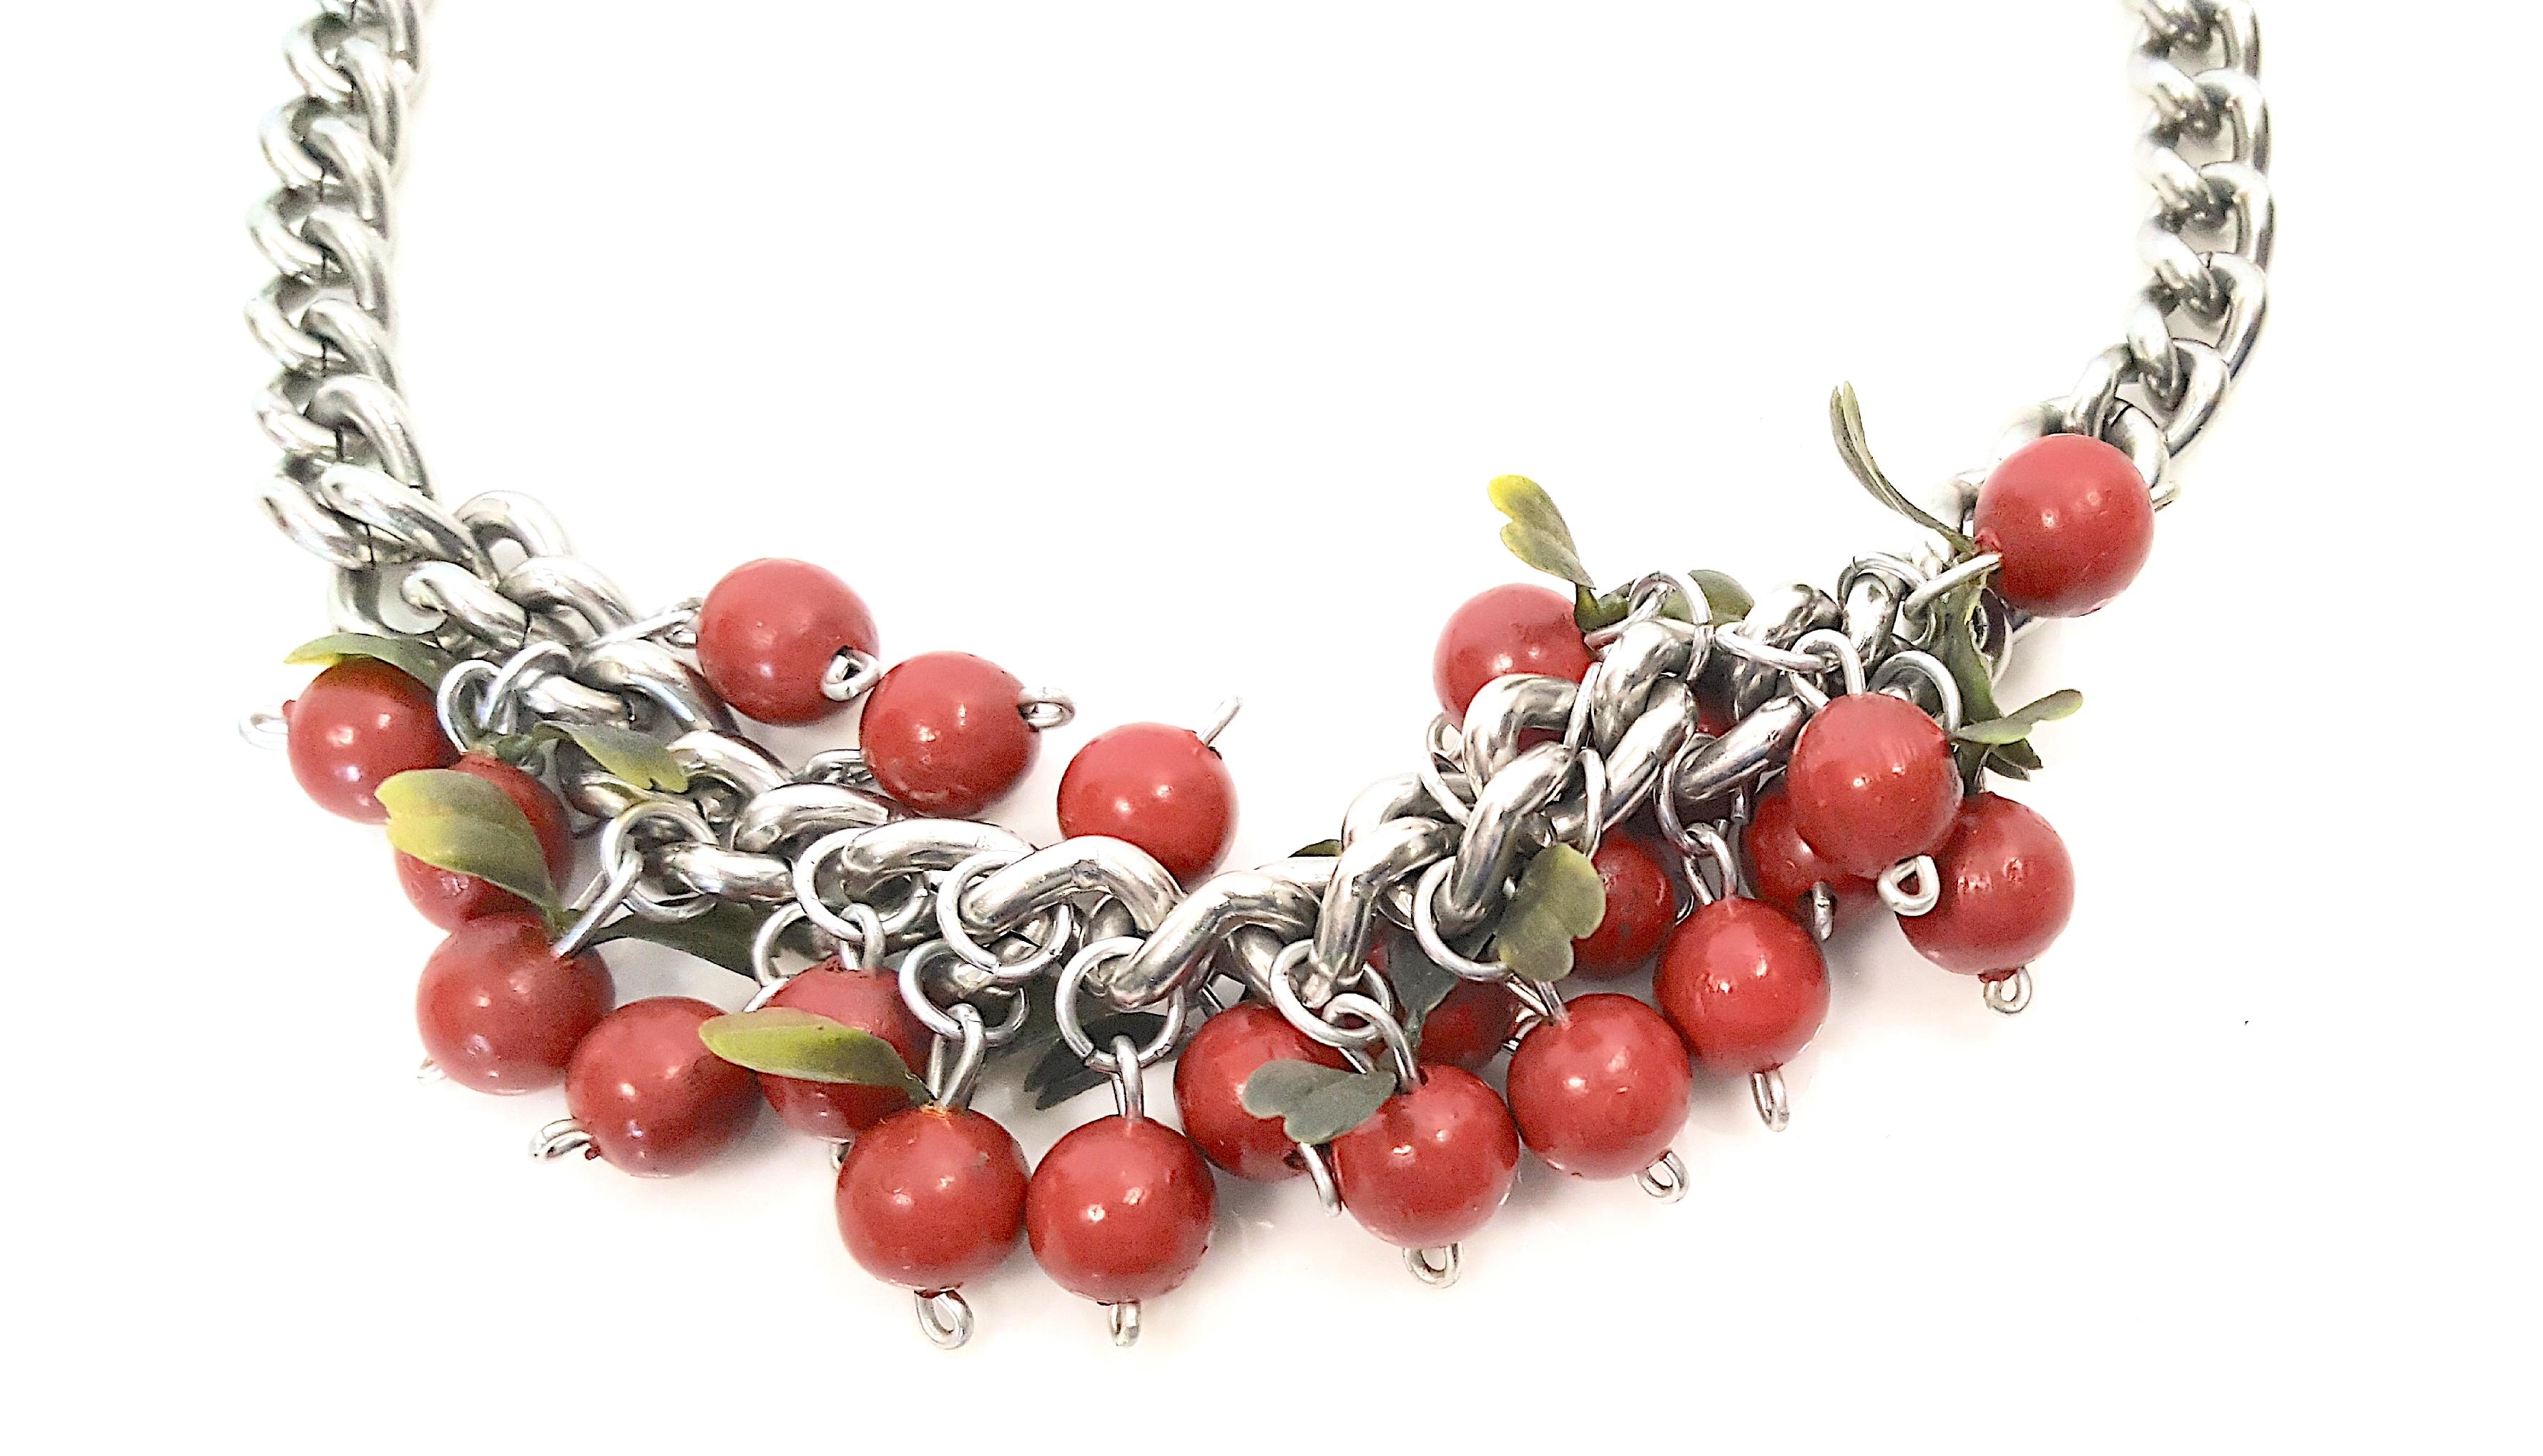 This vintage cherry-fruit charm necklace featuring red hand-painted wood is constructed of silver chain links. The clasp extension-chain is decorated with a single red bead. The green leaves that trim the fruit beads are a surprising two-tone